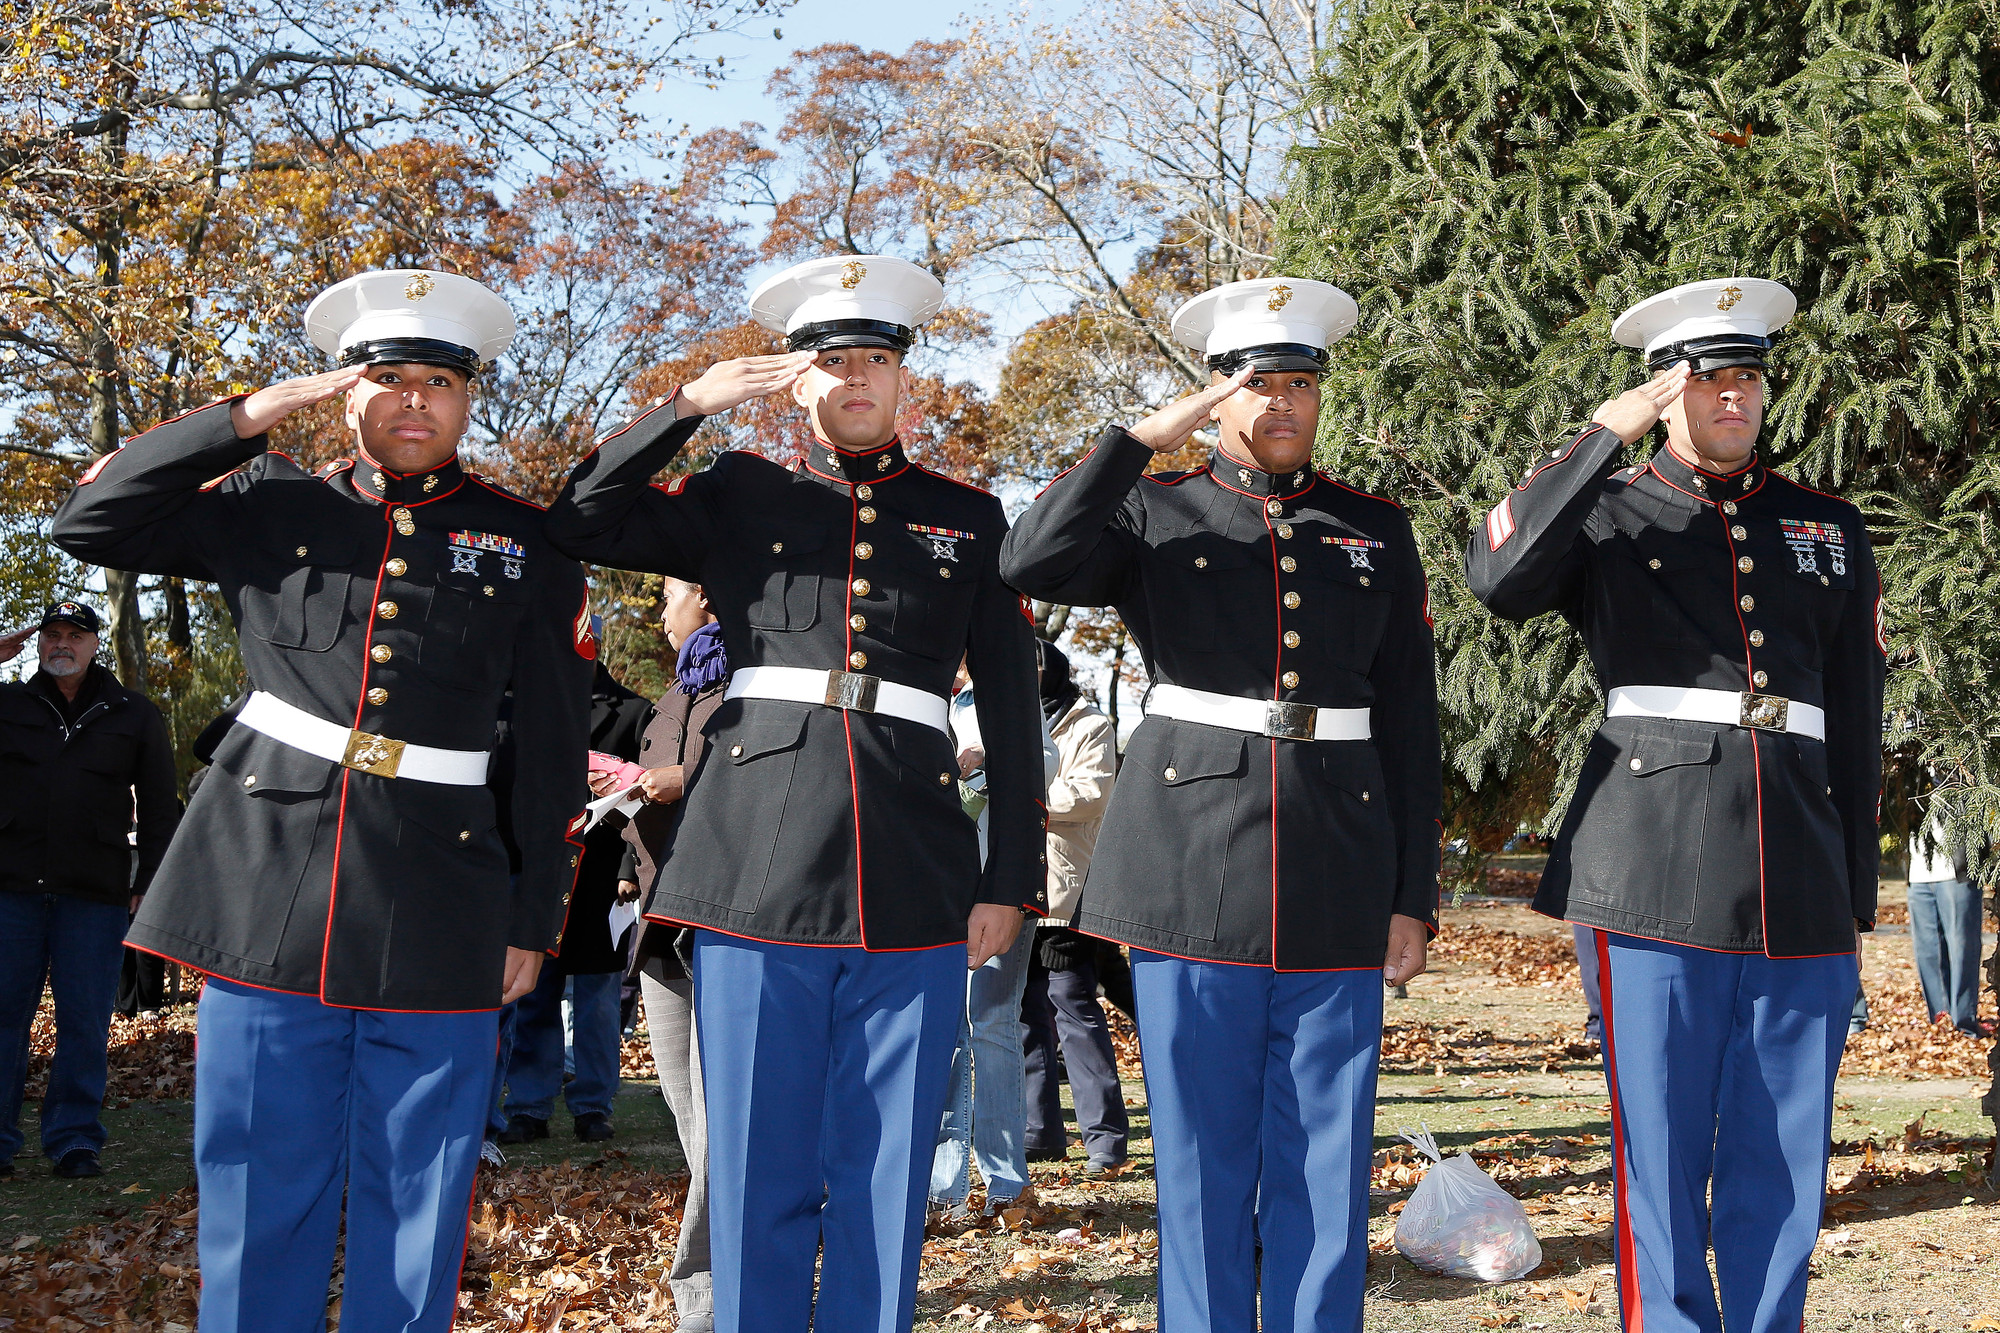 Members of the U.S. Marine Corps saluted as the village